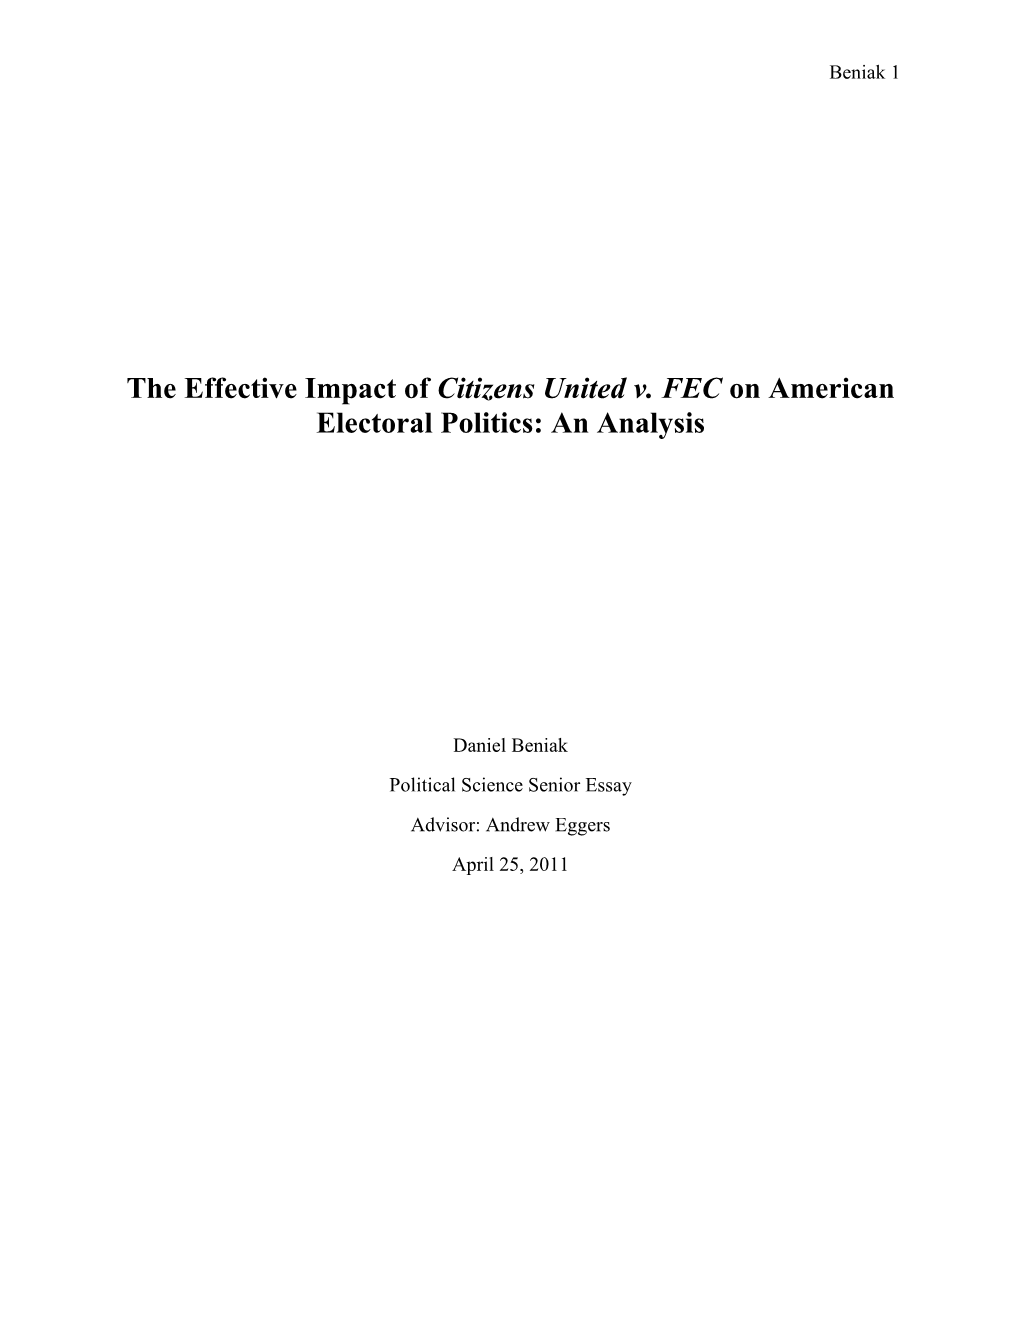 The Effective Impact of Citizens United V. FEC on American Electoral Politics: an Analysis